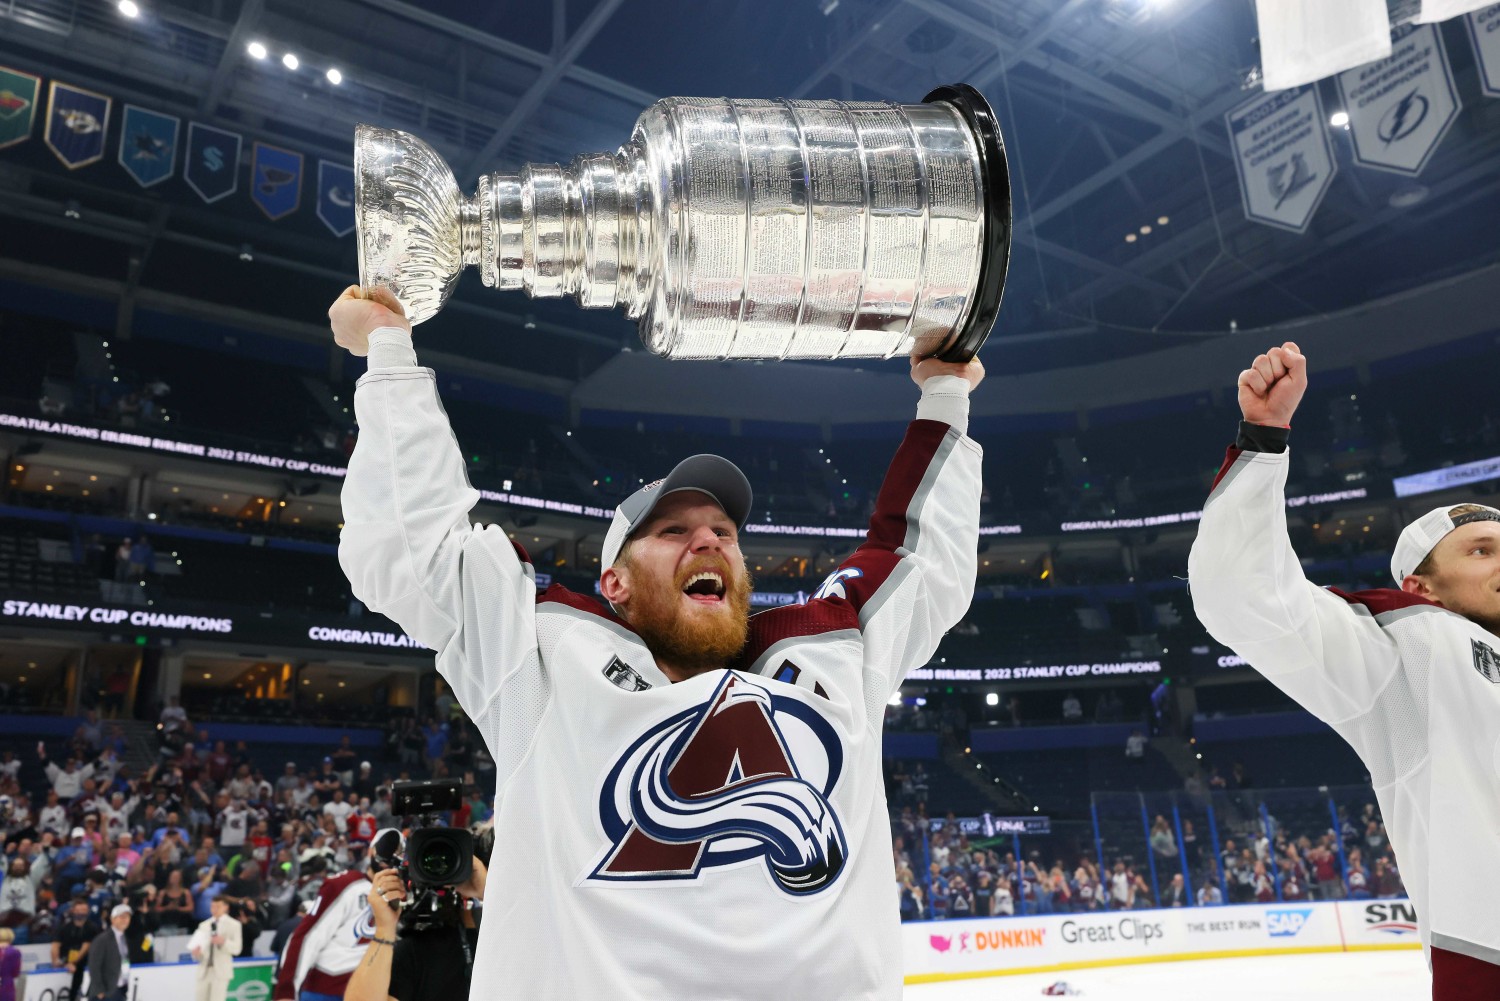 Colorado Rockies - 🎶TURN THE LIGHTS OFF, CARRY THE STANLEY CUP HOME🎶  CONGRATS TO THE 2022 STANLEY CUP CHAMPIONS, Colorado Avalanche‼️